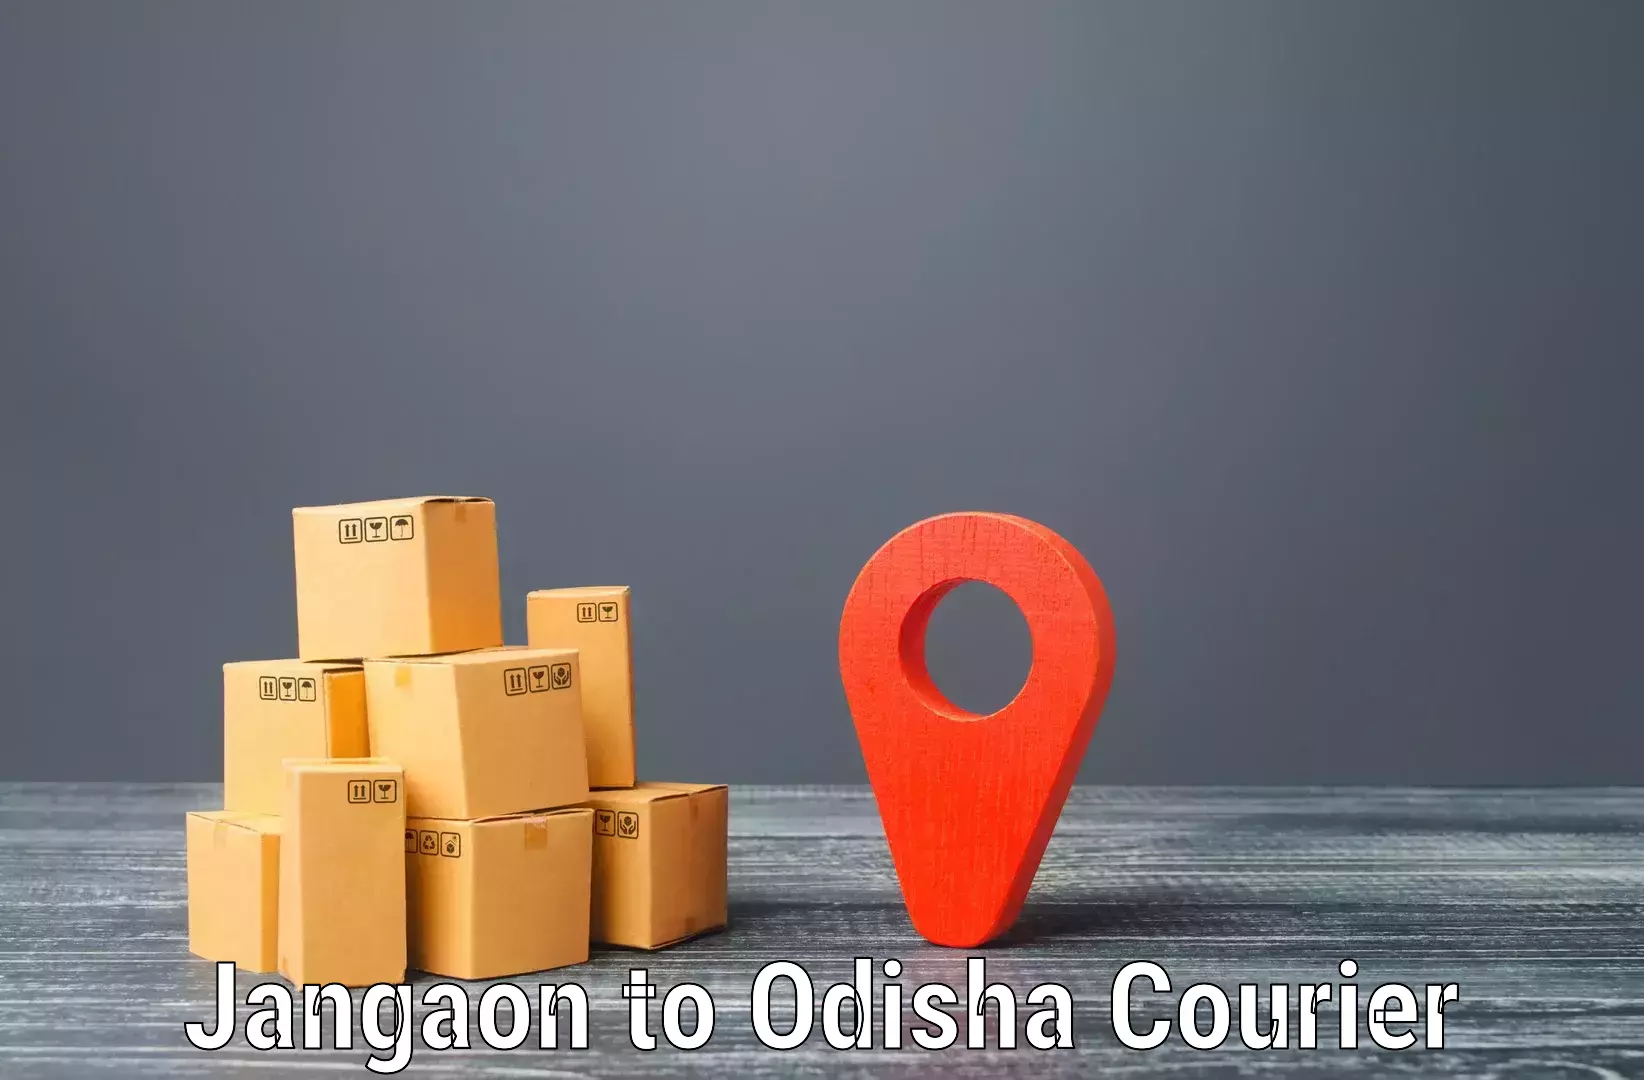 User-friendly courier app Jangaon to Pipili